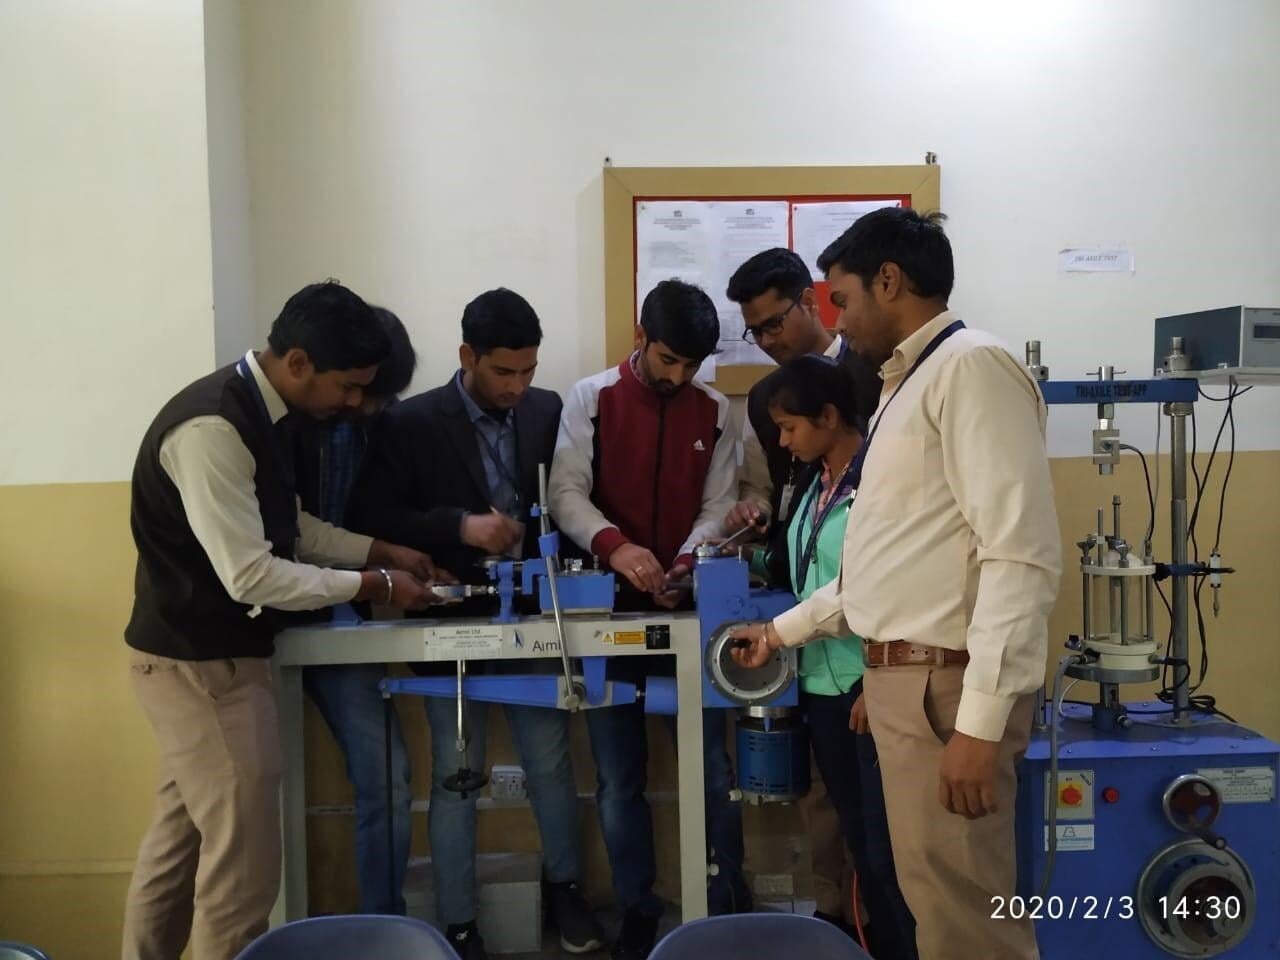 Geotechnical Engineering Lab